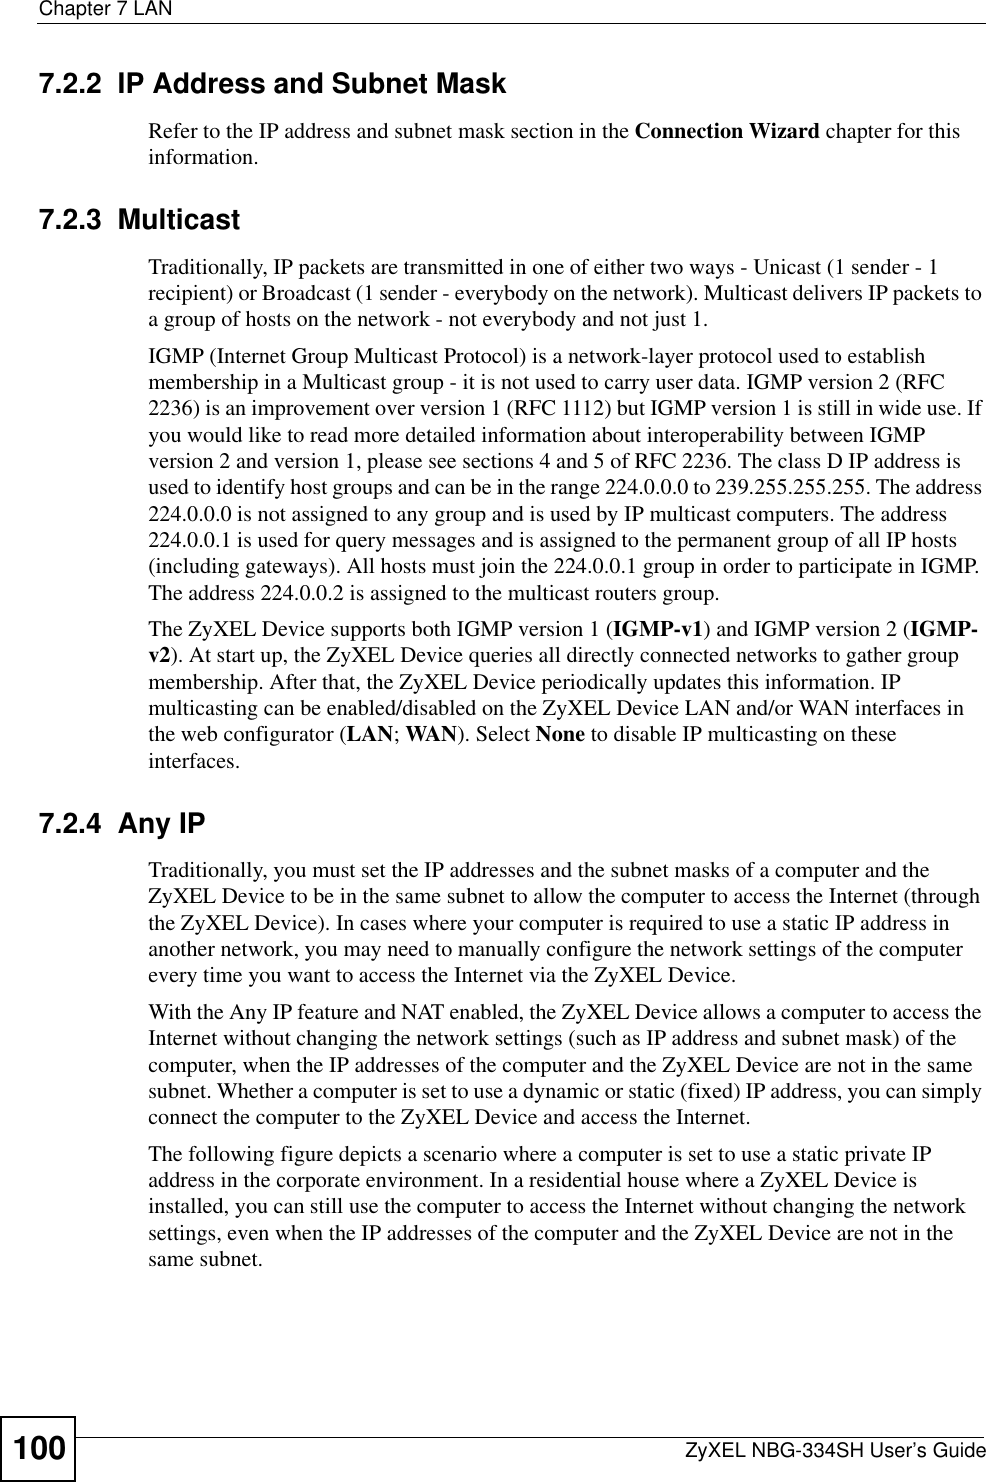 Chapter 7 LANZyXEL NBG-334SH User’s Guide1007.2.2  IP Address and Subnet MaskRefer to the IP address and subnet mask section in the Connection Wizard chapter for this information.7.2.3  MulticastTraditionally, IP packets are transmitted in one of either two ways - Unicast (1 sender - 1 recipient) or Broadcast (1 sender - everybody on the network). Multicast delivers IP packets to a group of hosts on the network - not everybody and not just 1. IGMP (Internet Group Multicast Protocol) is a network-layer protocol used to establish membership in a Multicast group - it is not used to carry user data. IGMP version 2 (RFC 2236) is an improvement over version 1 (RFC 1112) but IGMP version 1 is still in wide use. If you would like to read more detailed information about interoperability between IGMP version 2 and version 1, please see sections 4 and 5 of RFC 2236. The class D IP address is used to identify host groups and can be in the range 224.0.0.0 to 239.255.255.255. The address 224.0.0.0 is not assigned to any group and is used by IP multicast computers. The address 224.0.0.1 is used for query messages and is assigned to the permanent group of all IP hosts (including gateways). All hosts must join the 224.0.0.1 group in order to participate in IGMP. The address 224.0.0.2 is assigned to the multicast routers group. The ZyXEL Device supports both IGMP version 1 (IGMP-v1) and IGMP version 2 (IGMP-v2). At start up, the ZyXEL Device queries all directly connected networks to gather group membership. After that, the ZyXEL Device periodically updates this information. IP multicasting can be enabled/disabled on the ZyXEL Device LAN and/or WAN interfaces in the web configurator (LAN; WAN). Select None to disable IP multicasting on these interfaces.7.2.4  Any IPTraditionally, you must set the IP addresses and the subnet masks of a computer and the ZyXEL Device to be in the same subnet to allow the computer to access the Internet (through the ZyXEL Device). In cases where your computer is required to use a static IP address in another network, you may need to manually configure the network settings of the computer every time you want to access the Internet via the ZyXEL Device.With the Any IP feature and NAT enabled, the ZyXEL Device allows a computer to access the Internet without changing the network settings (such as IP address and subnet mask) of the computer, when the IP addresses of the computer and the ZyXEL Device are not in the same subnet. Whether a computer is set to use a dynamic or static (fixed) IP address, you can simply connect the computer to the ZyXEL Device and access the Internet.The following figure depicts a scenario where a computer is set to use a static private IP address in the corporate environment. In a residential house where a ZyXEL Device is installed, you can still use the computer to access the Internet without changing the network settings, even when the IP addresses of the computer and the ZyXEL Device are not in the same subnet. 